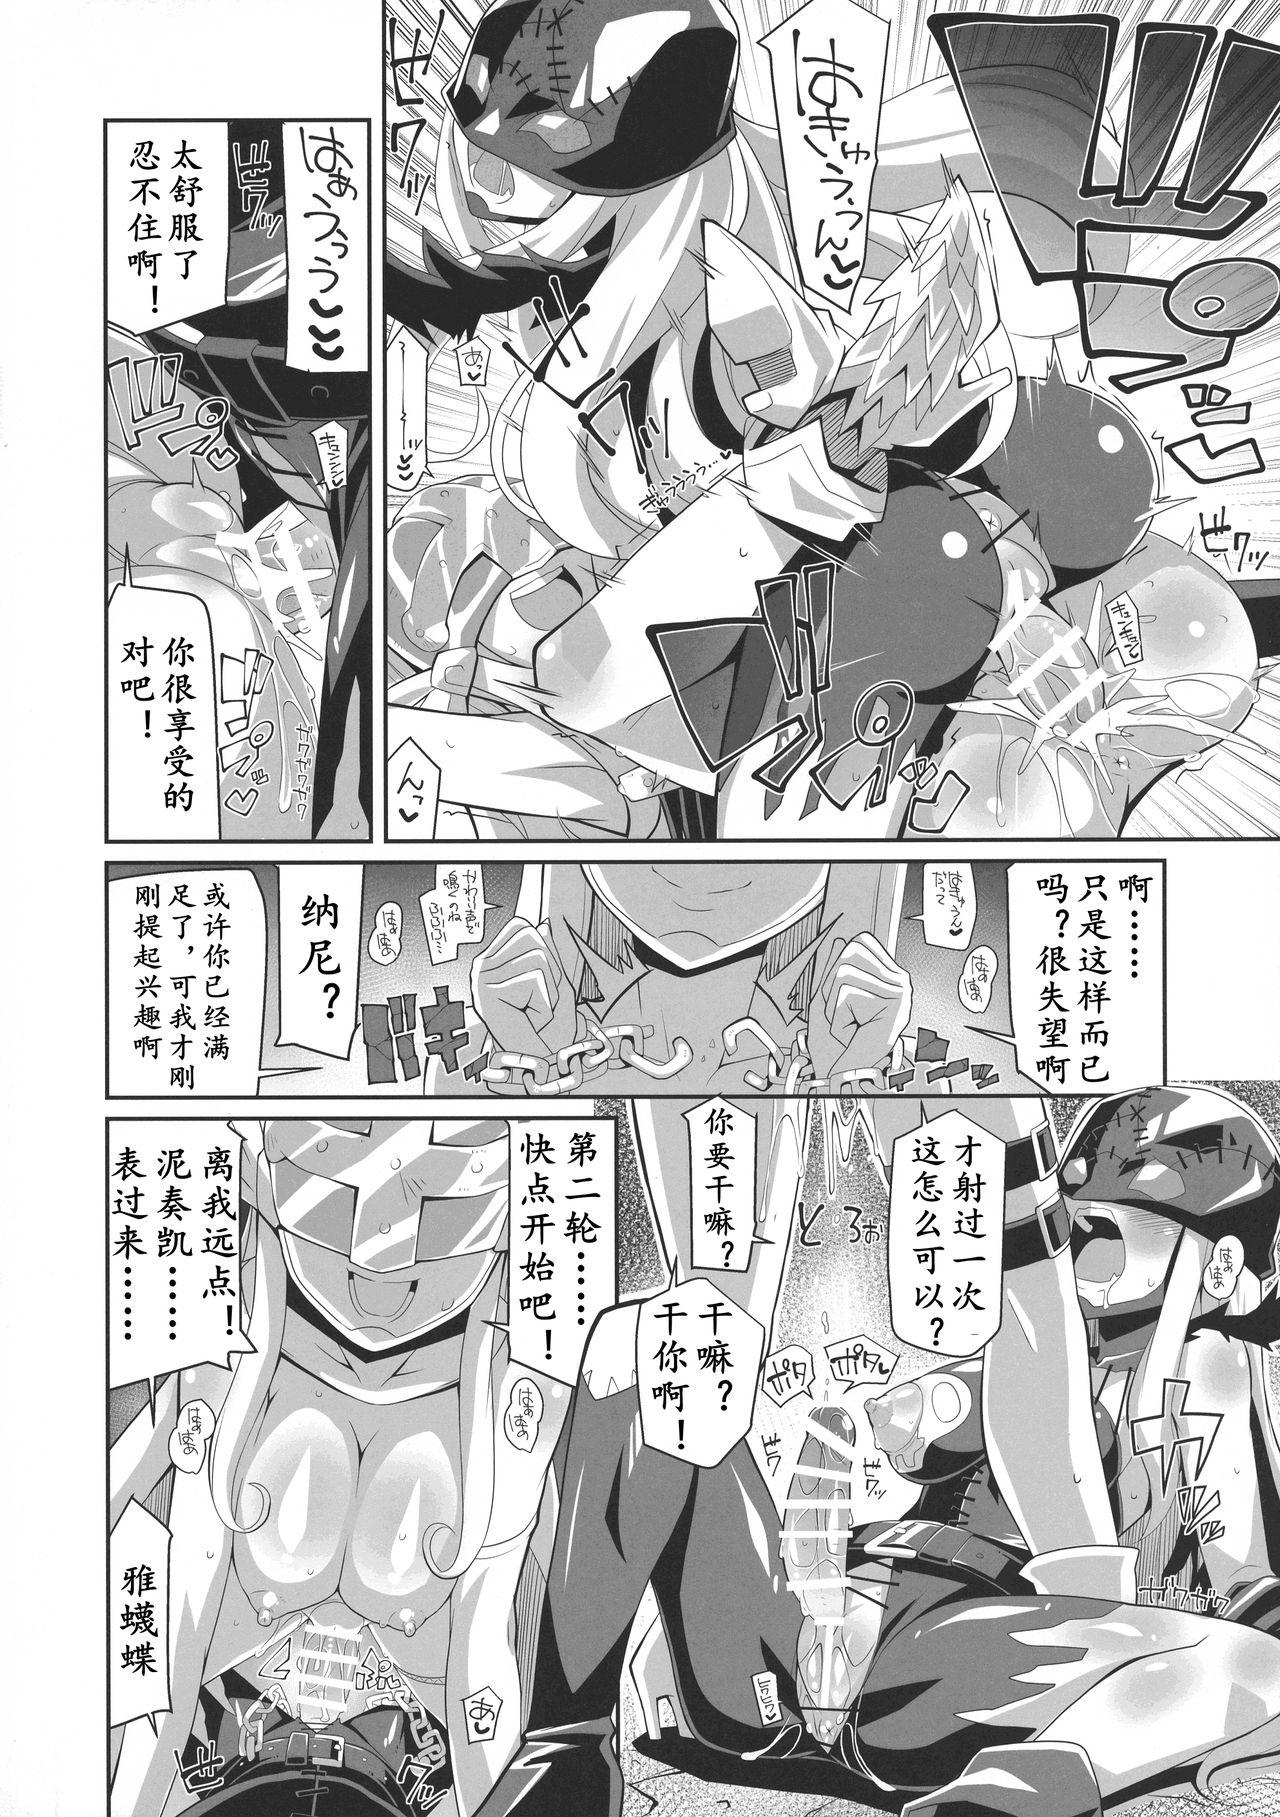 Wife ANGELSxDEMONS | 莫斯提兽 - Digimon Satin - Page 7